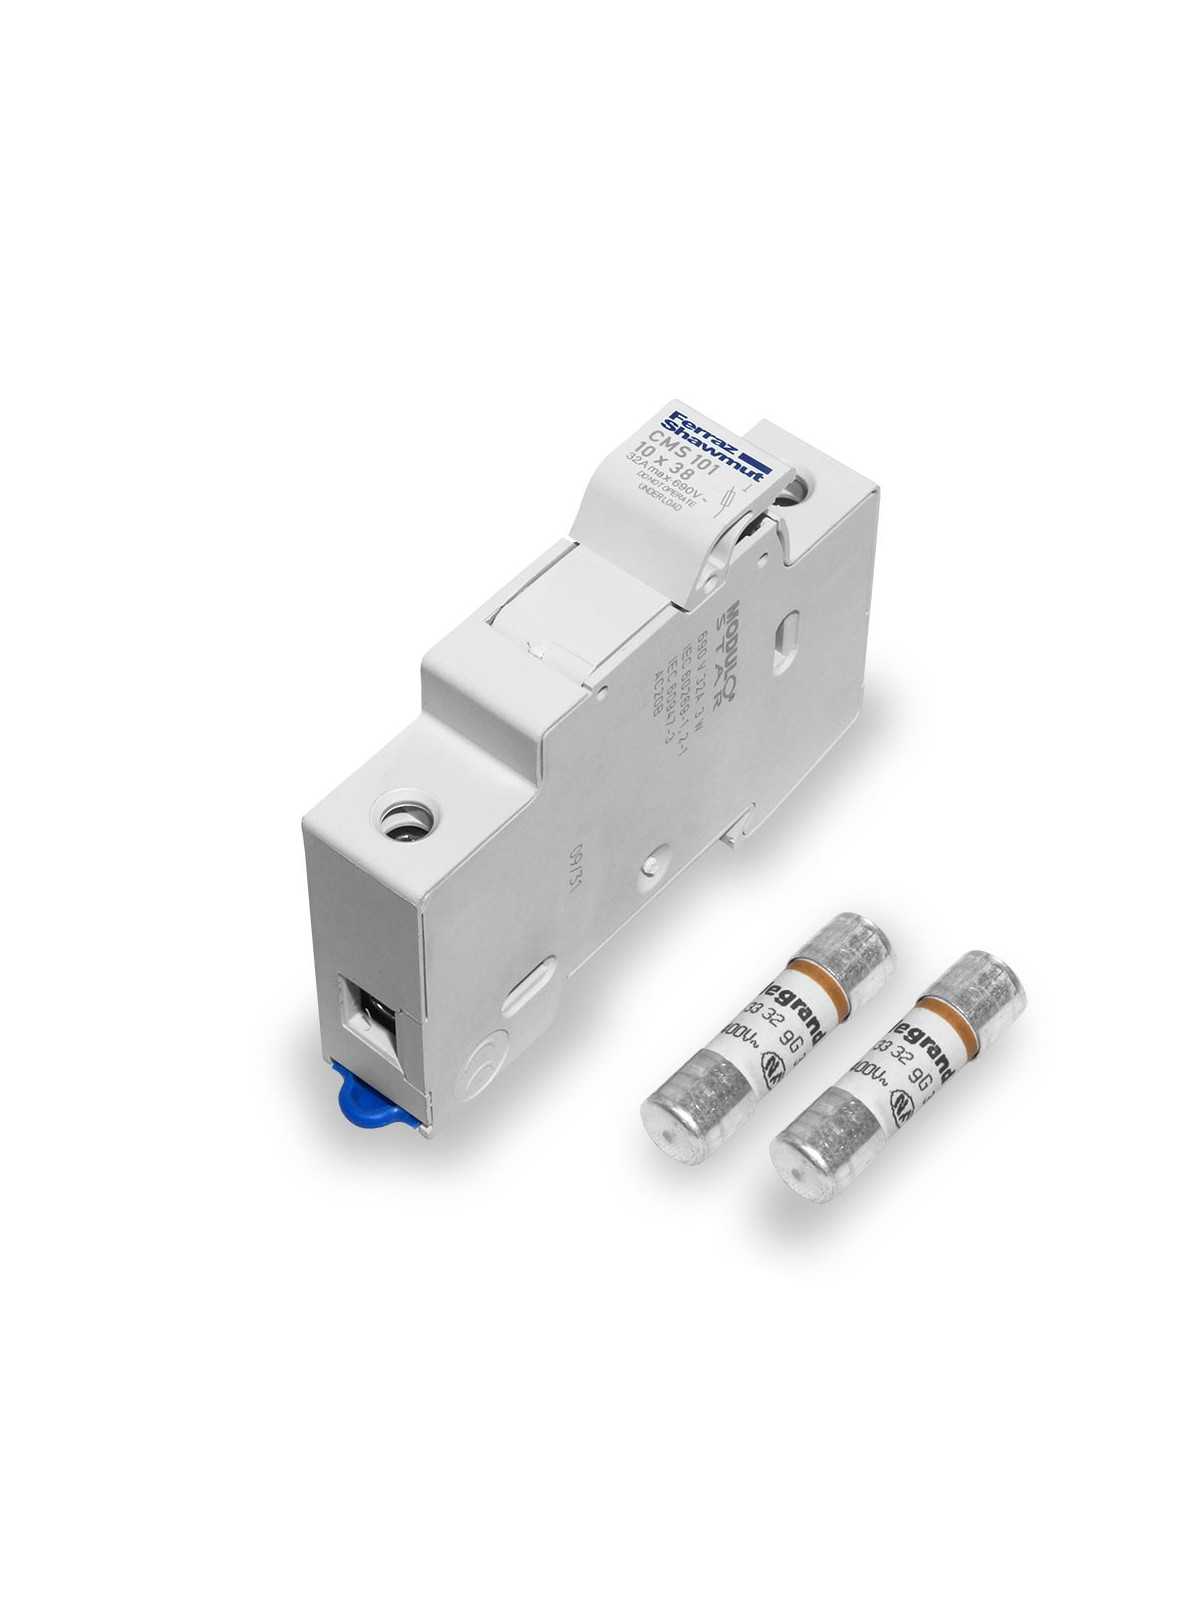 DC 16A to 100A Fuse holder